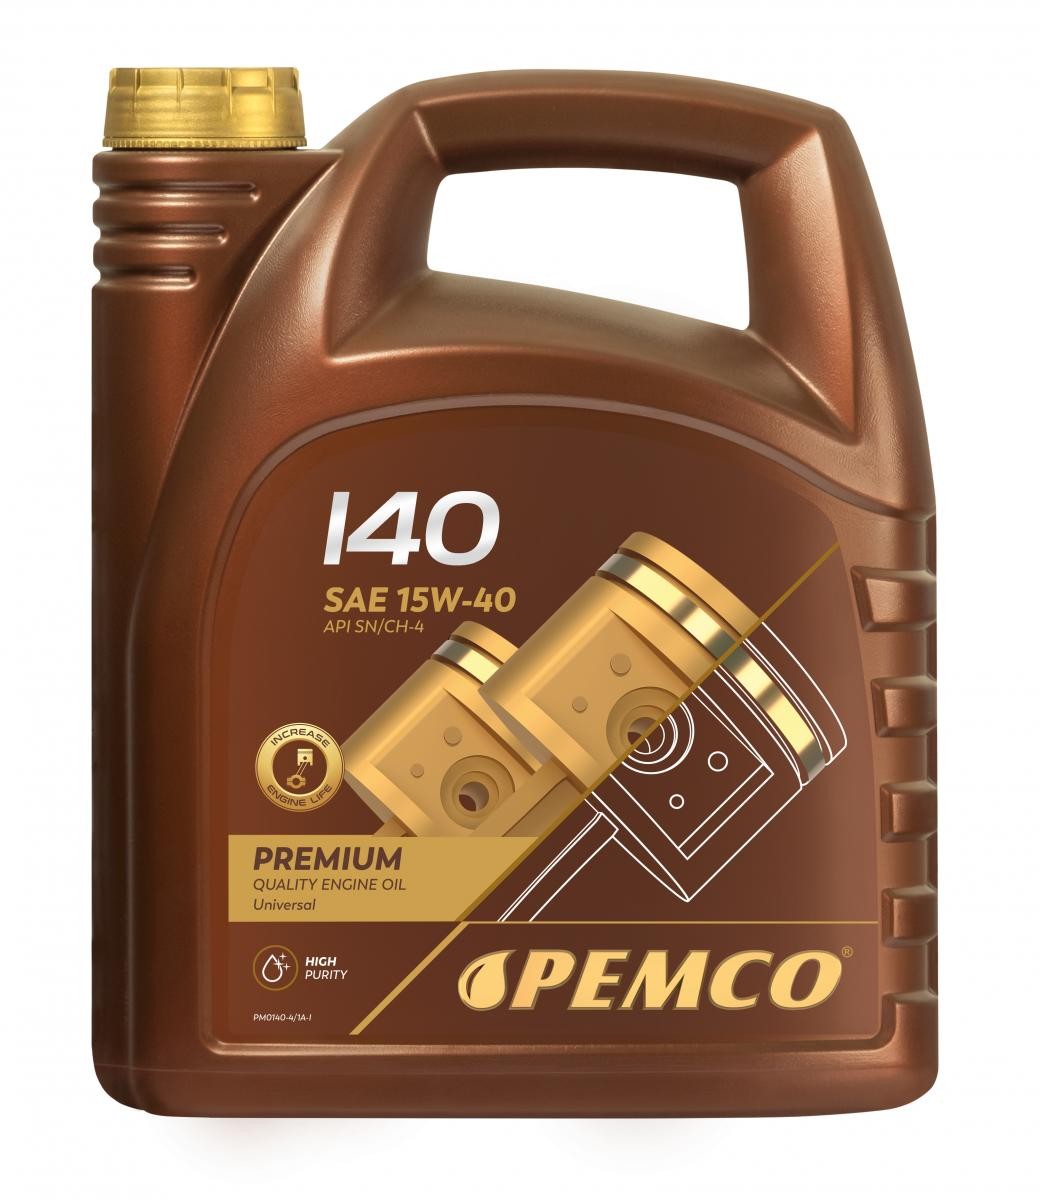 Great value for money - PEMCO Engine oil PM0140-4